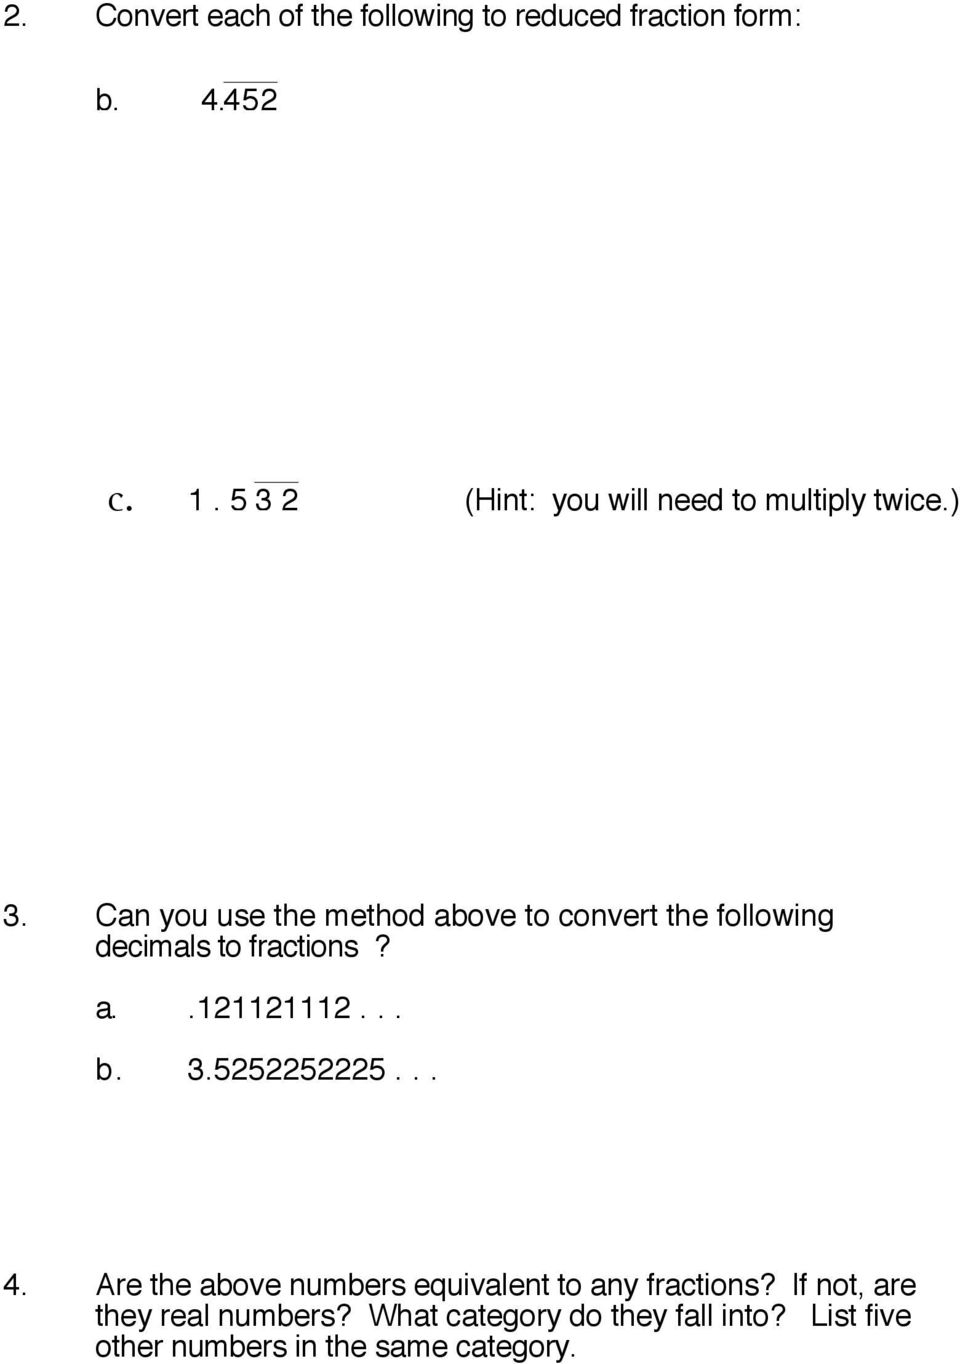 Can you use the method above to convert the following decimals to fractions? a..121121112... b. 3.